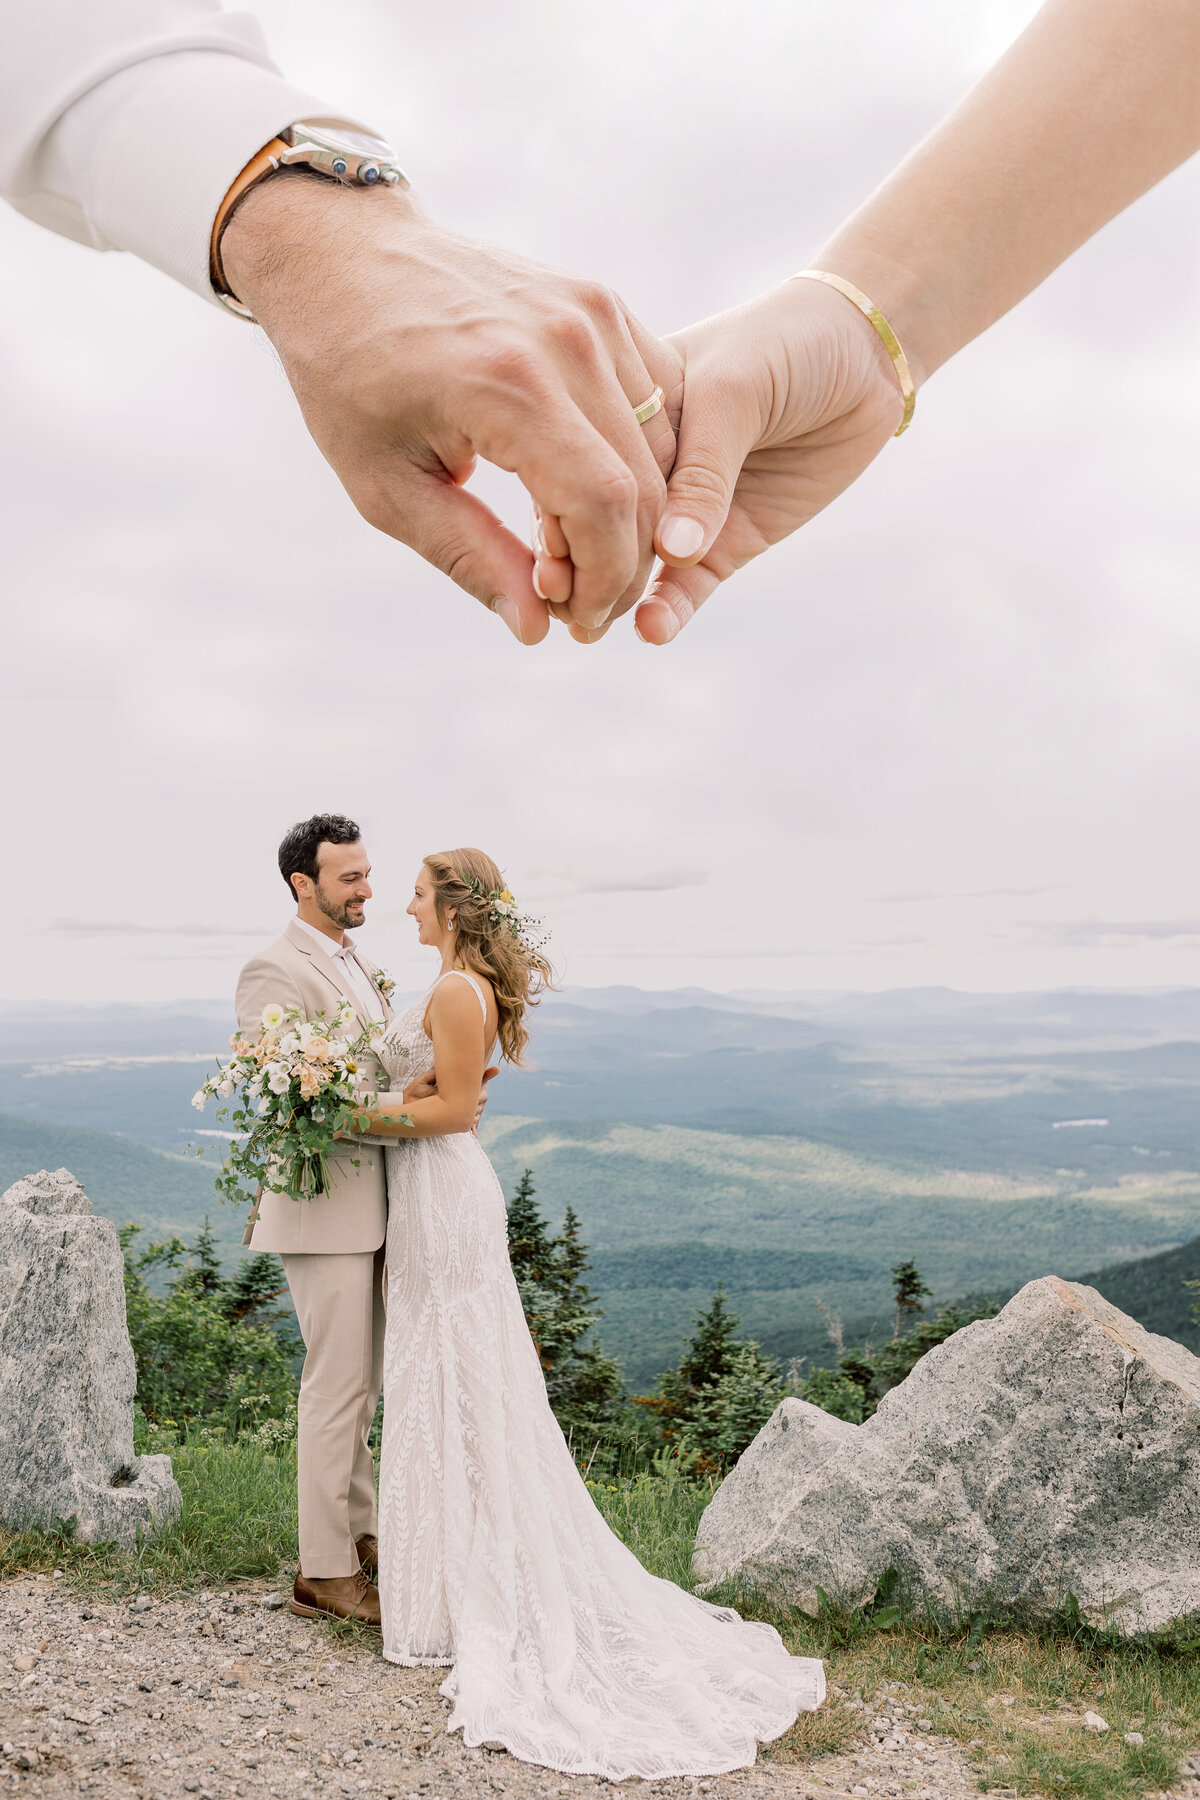 Bride and Groom at Whiteface Mountain during their elopement in the Summer.